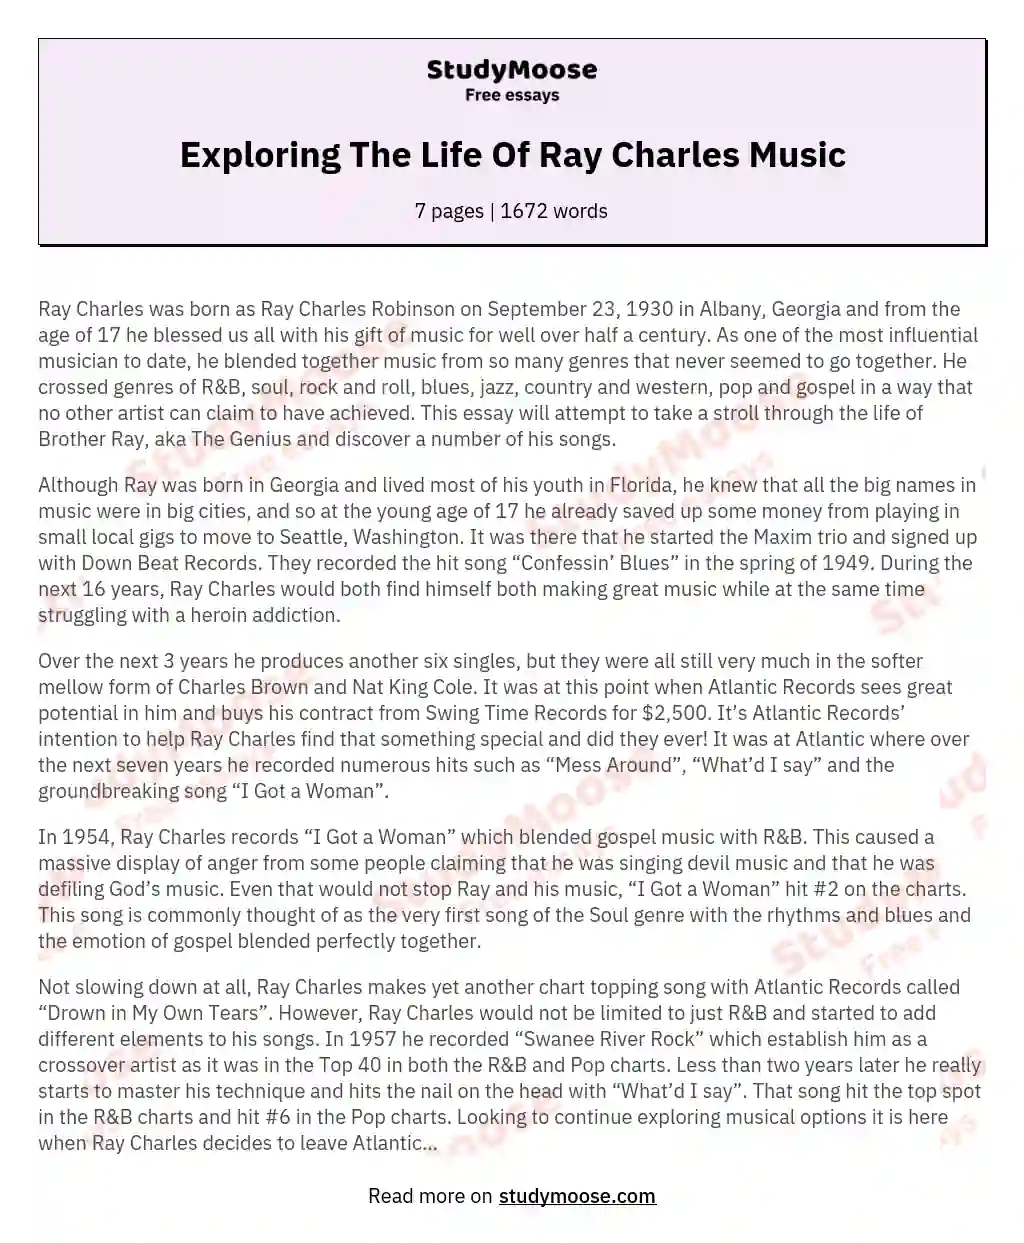 Exploring The Life Of Ray Charles Music essay